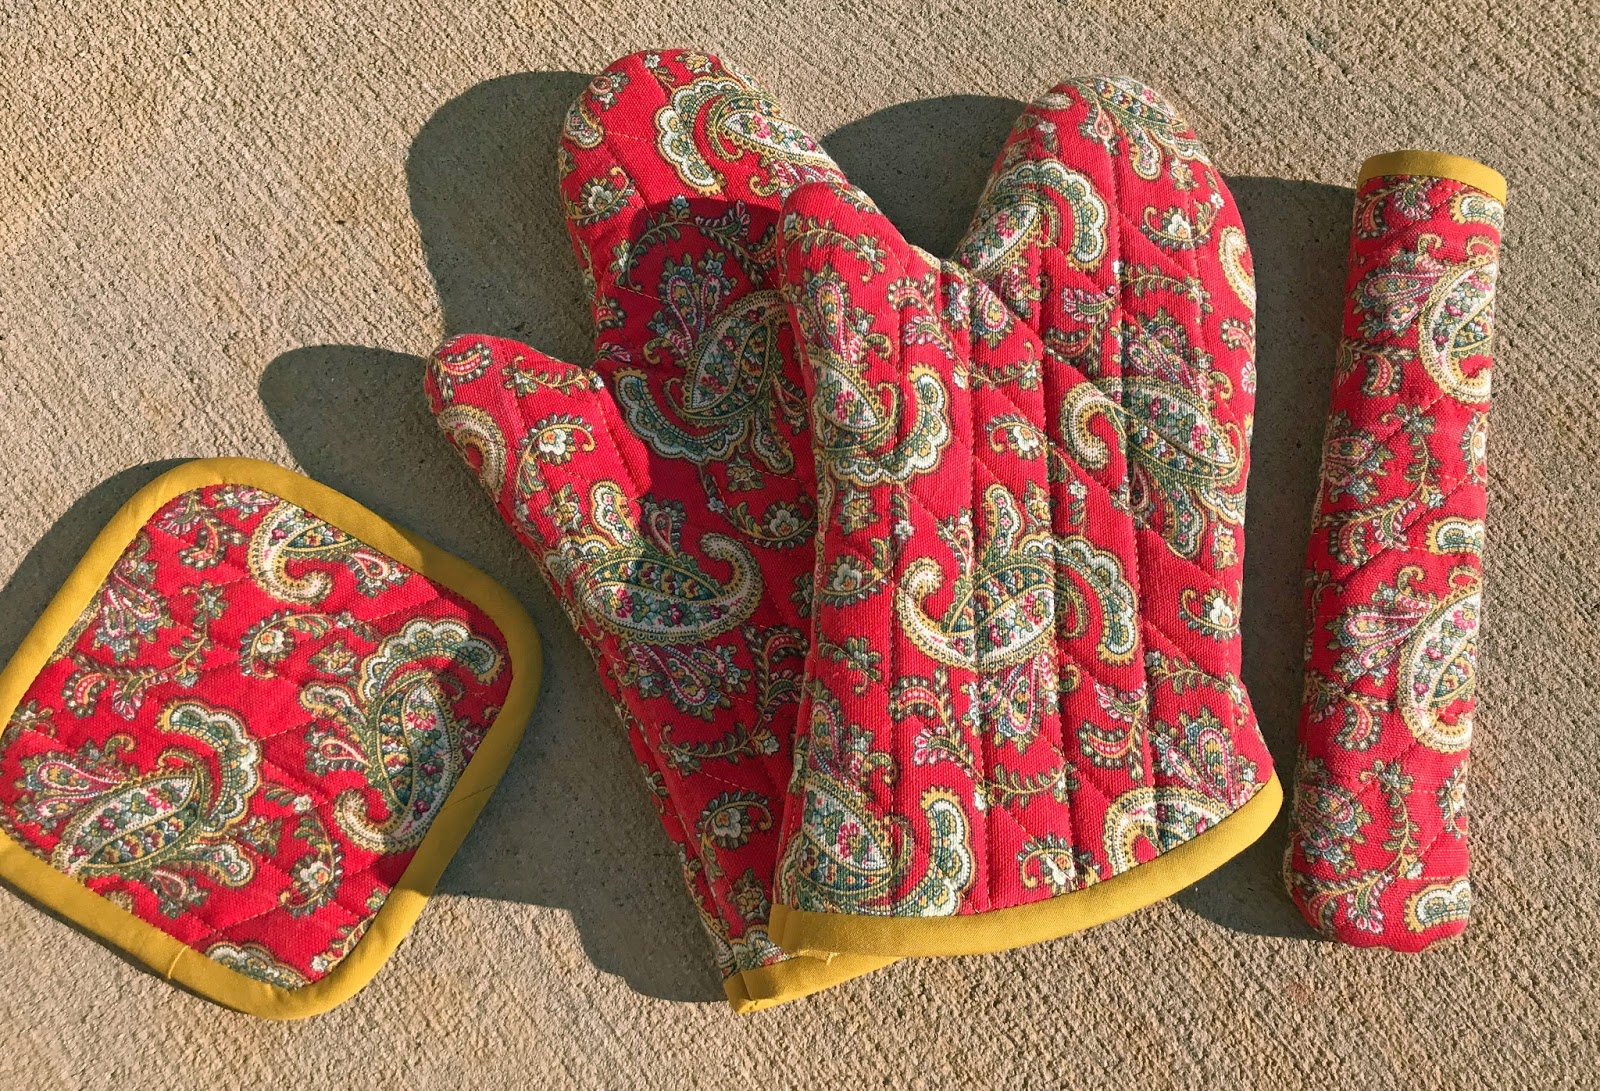 Tea Time Kitchen Appliqué: Quilted Oven Mitts - Sew4Home